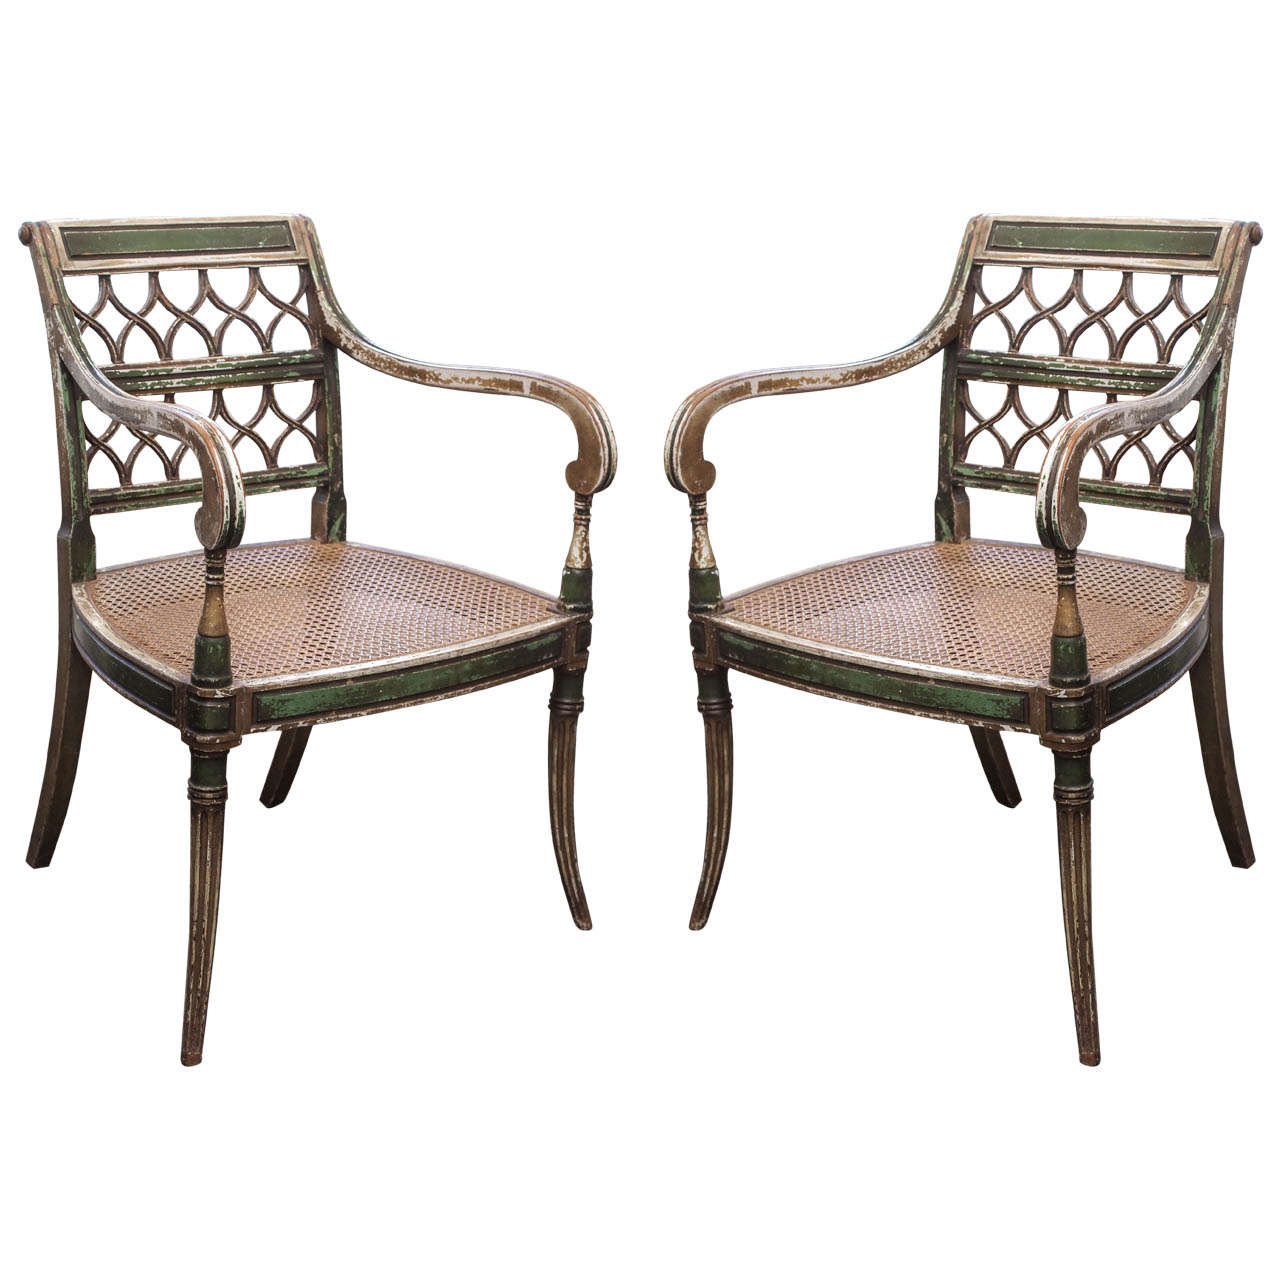 Pair of French Armchairs circa 1920